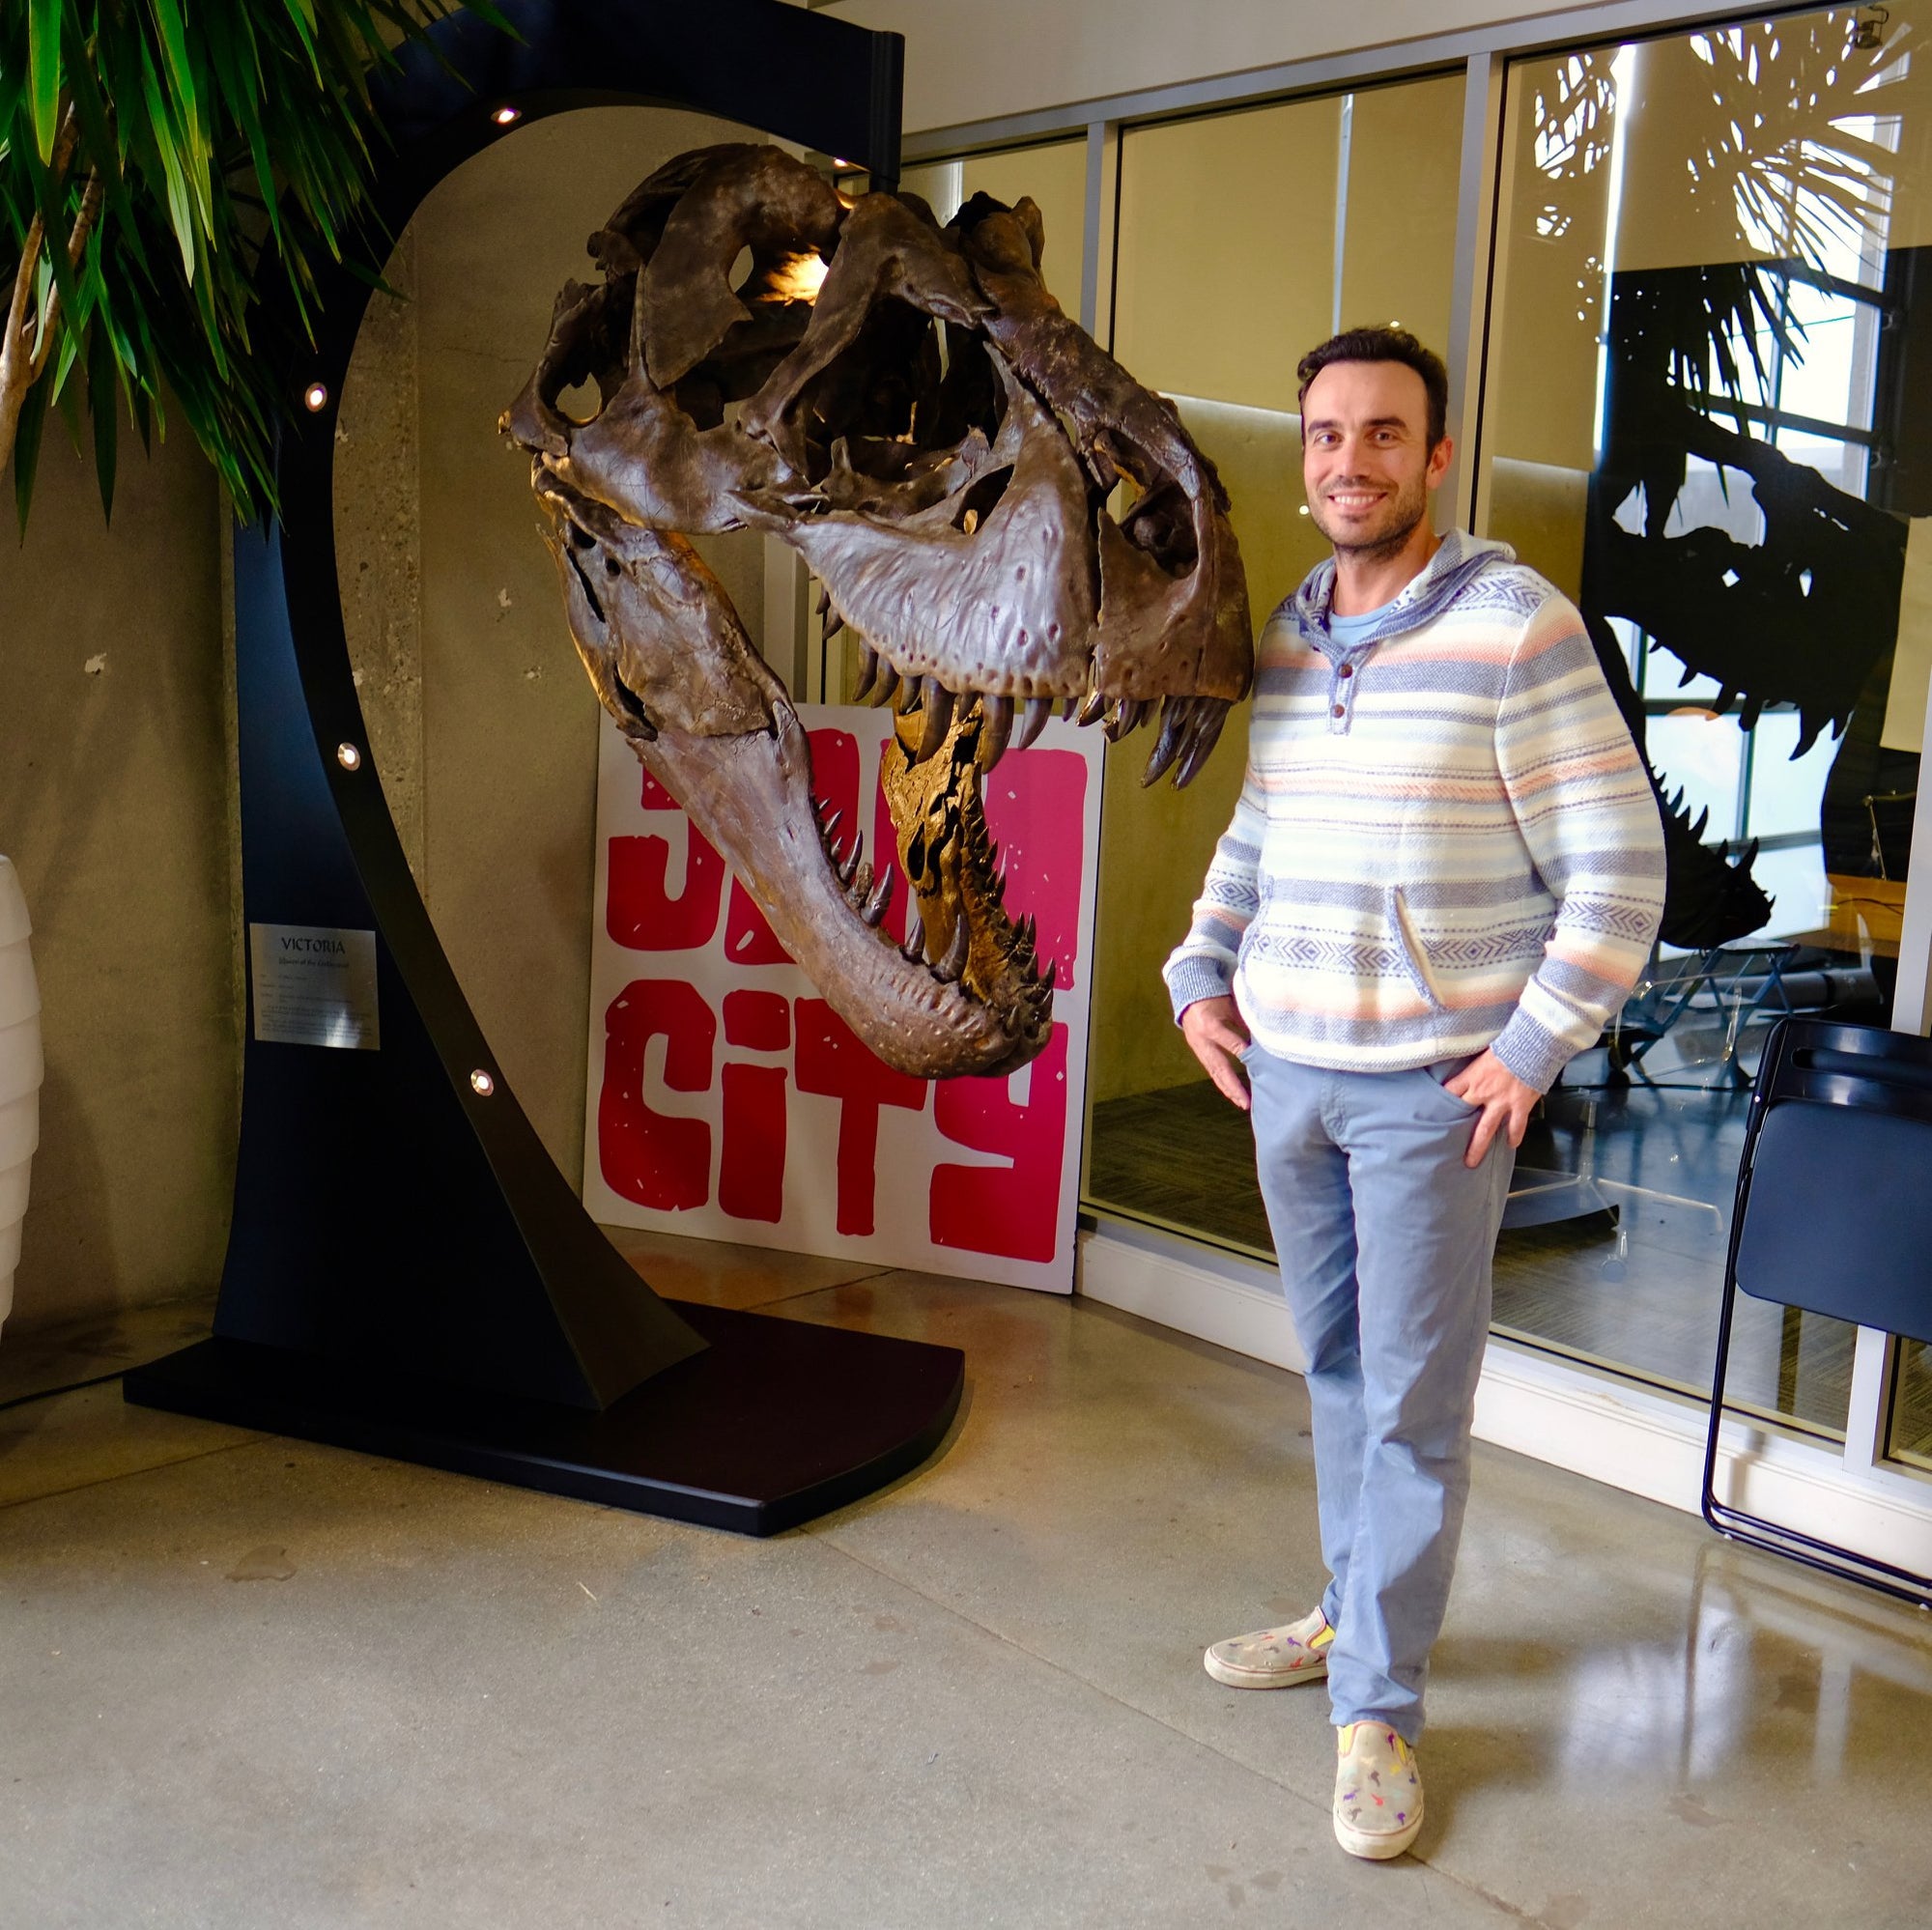 Tyrannosaurus rex - skull cast  One of our guests posing with the first cast of the skull of Victoria, a famous T.rex. The skull was 3D printed from original scans taken by the world expert in digitizing dinosaur bones.